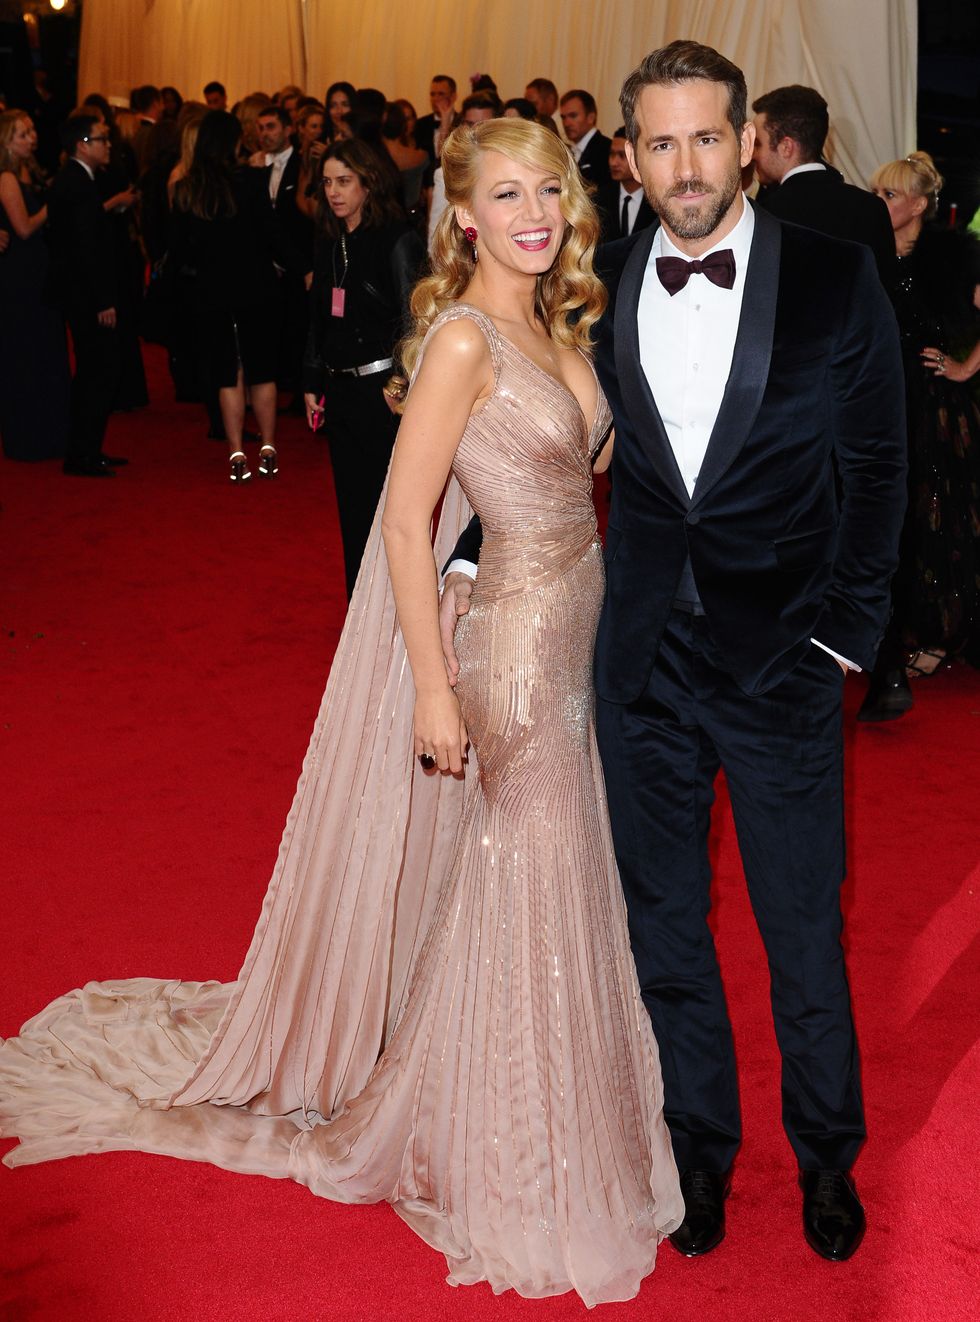 blake lively and ryan reynolds at the charles james beyond fashion costume institute gala